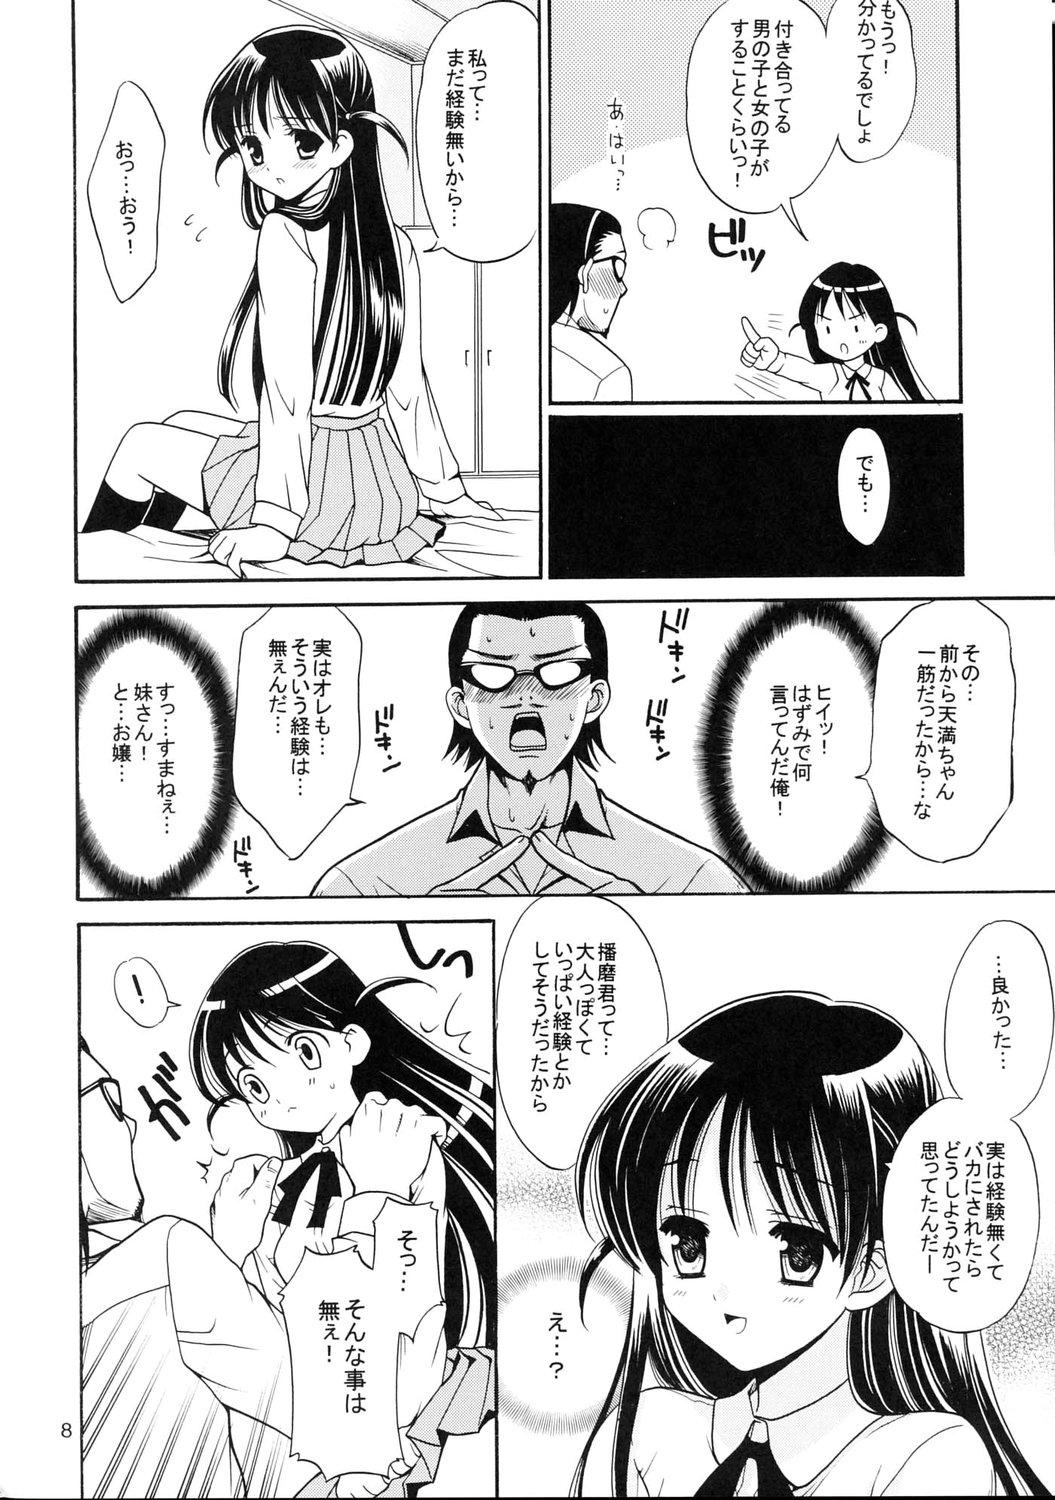 High Definition Hige-seito Harima! 3 - School rumble Hot Couple Sex - Page 7